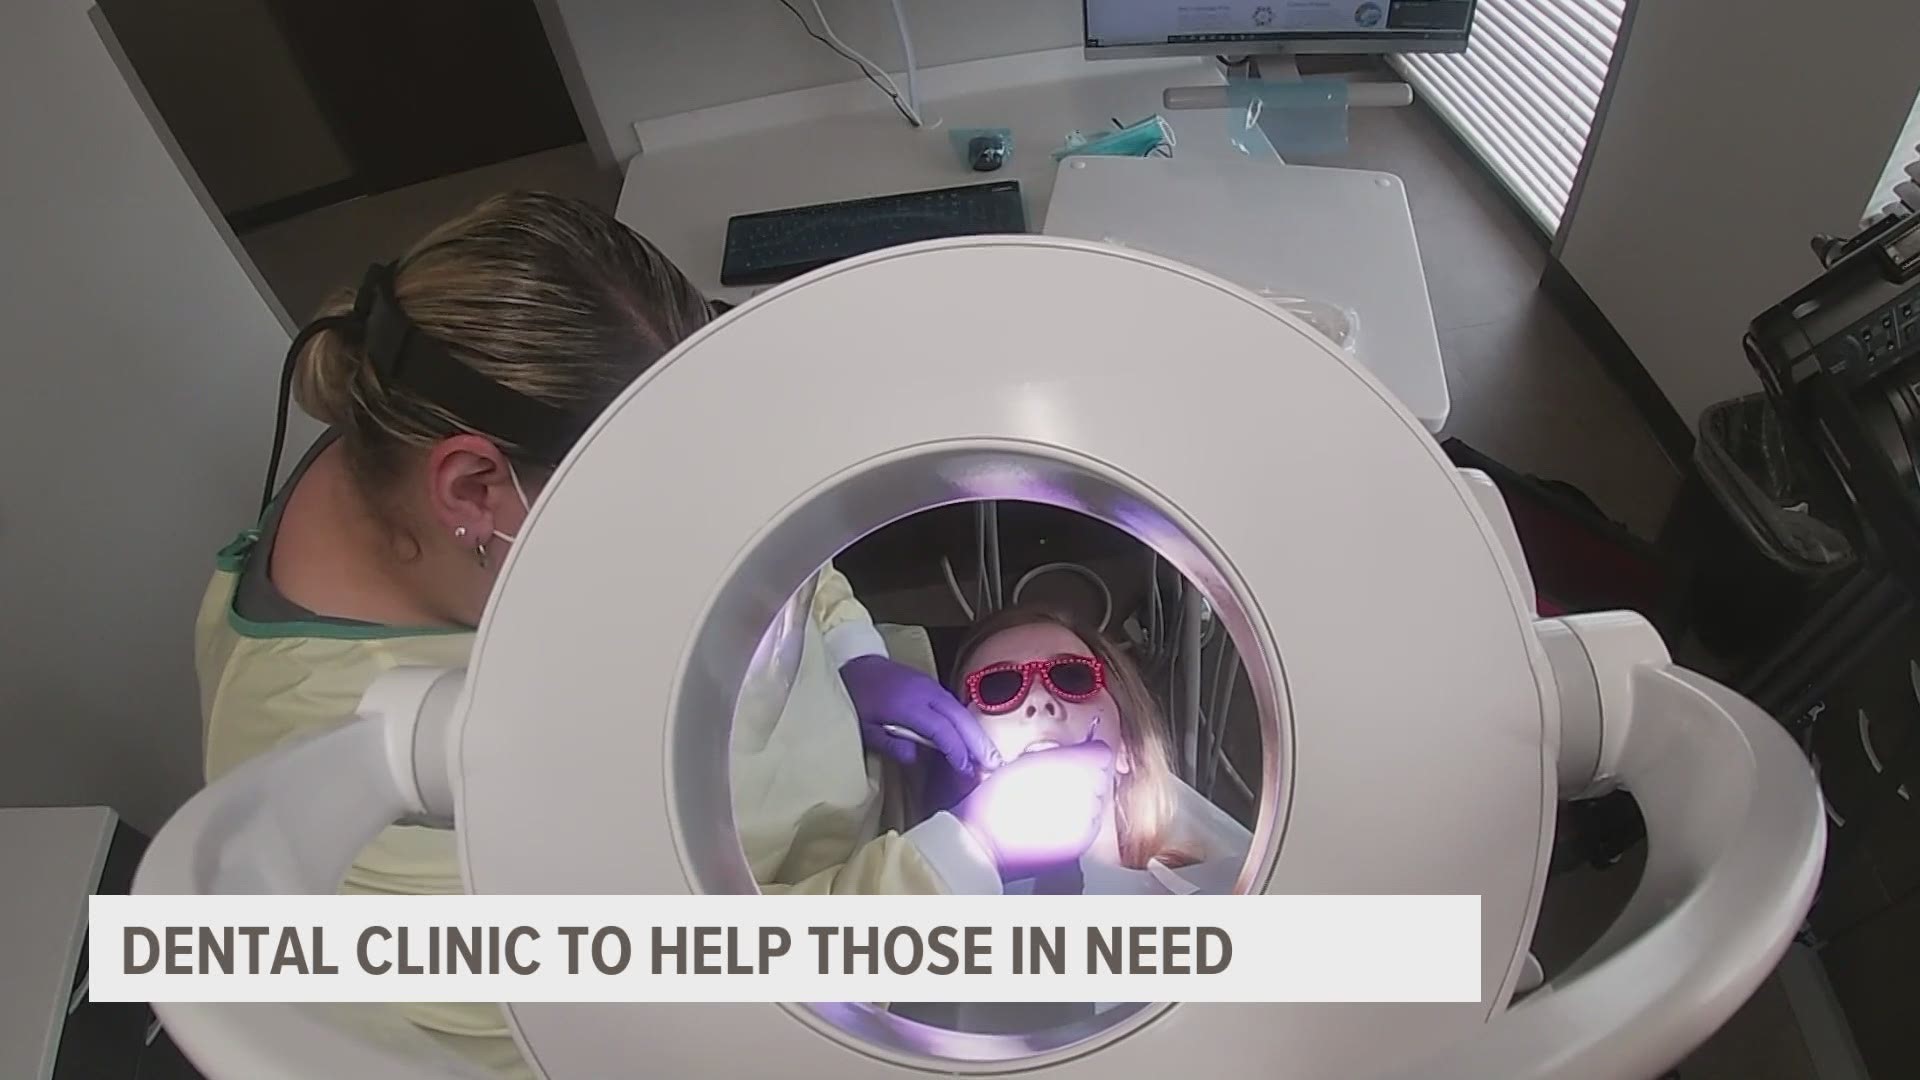 Primary Health Care opened a Dental Clinic in Ames to help the underserved population have better access to good oral hygiene.